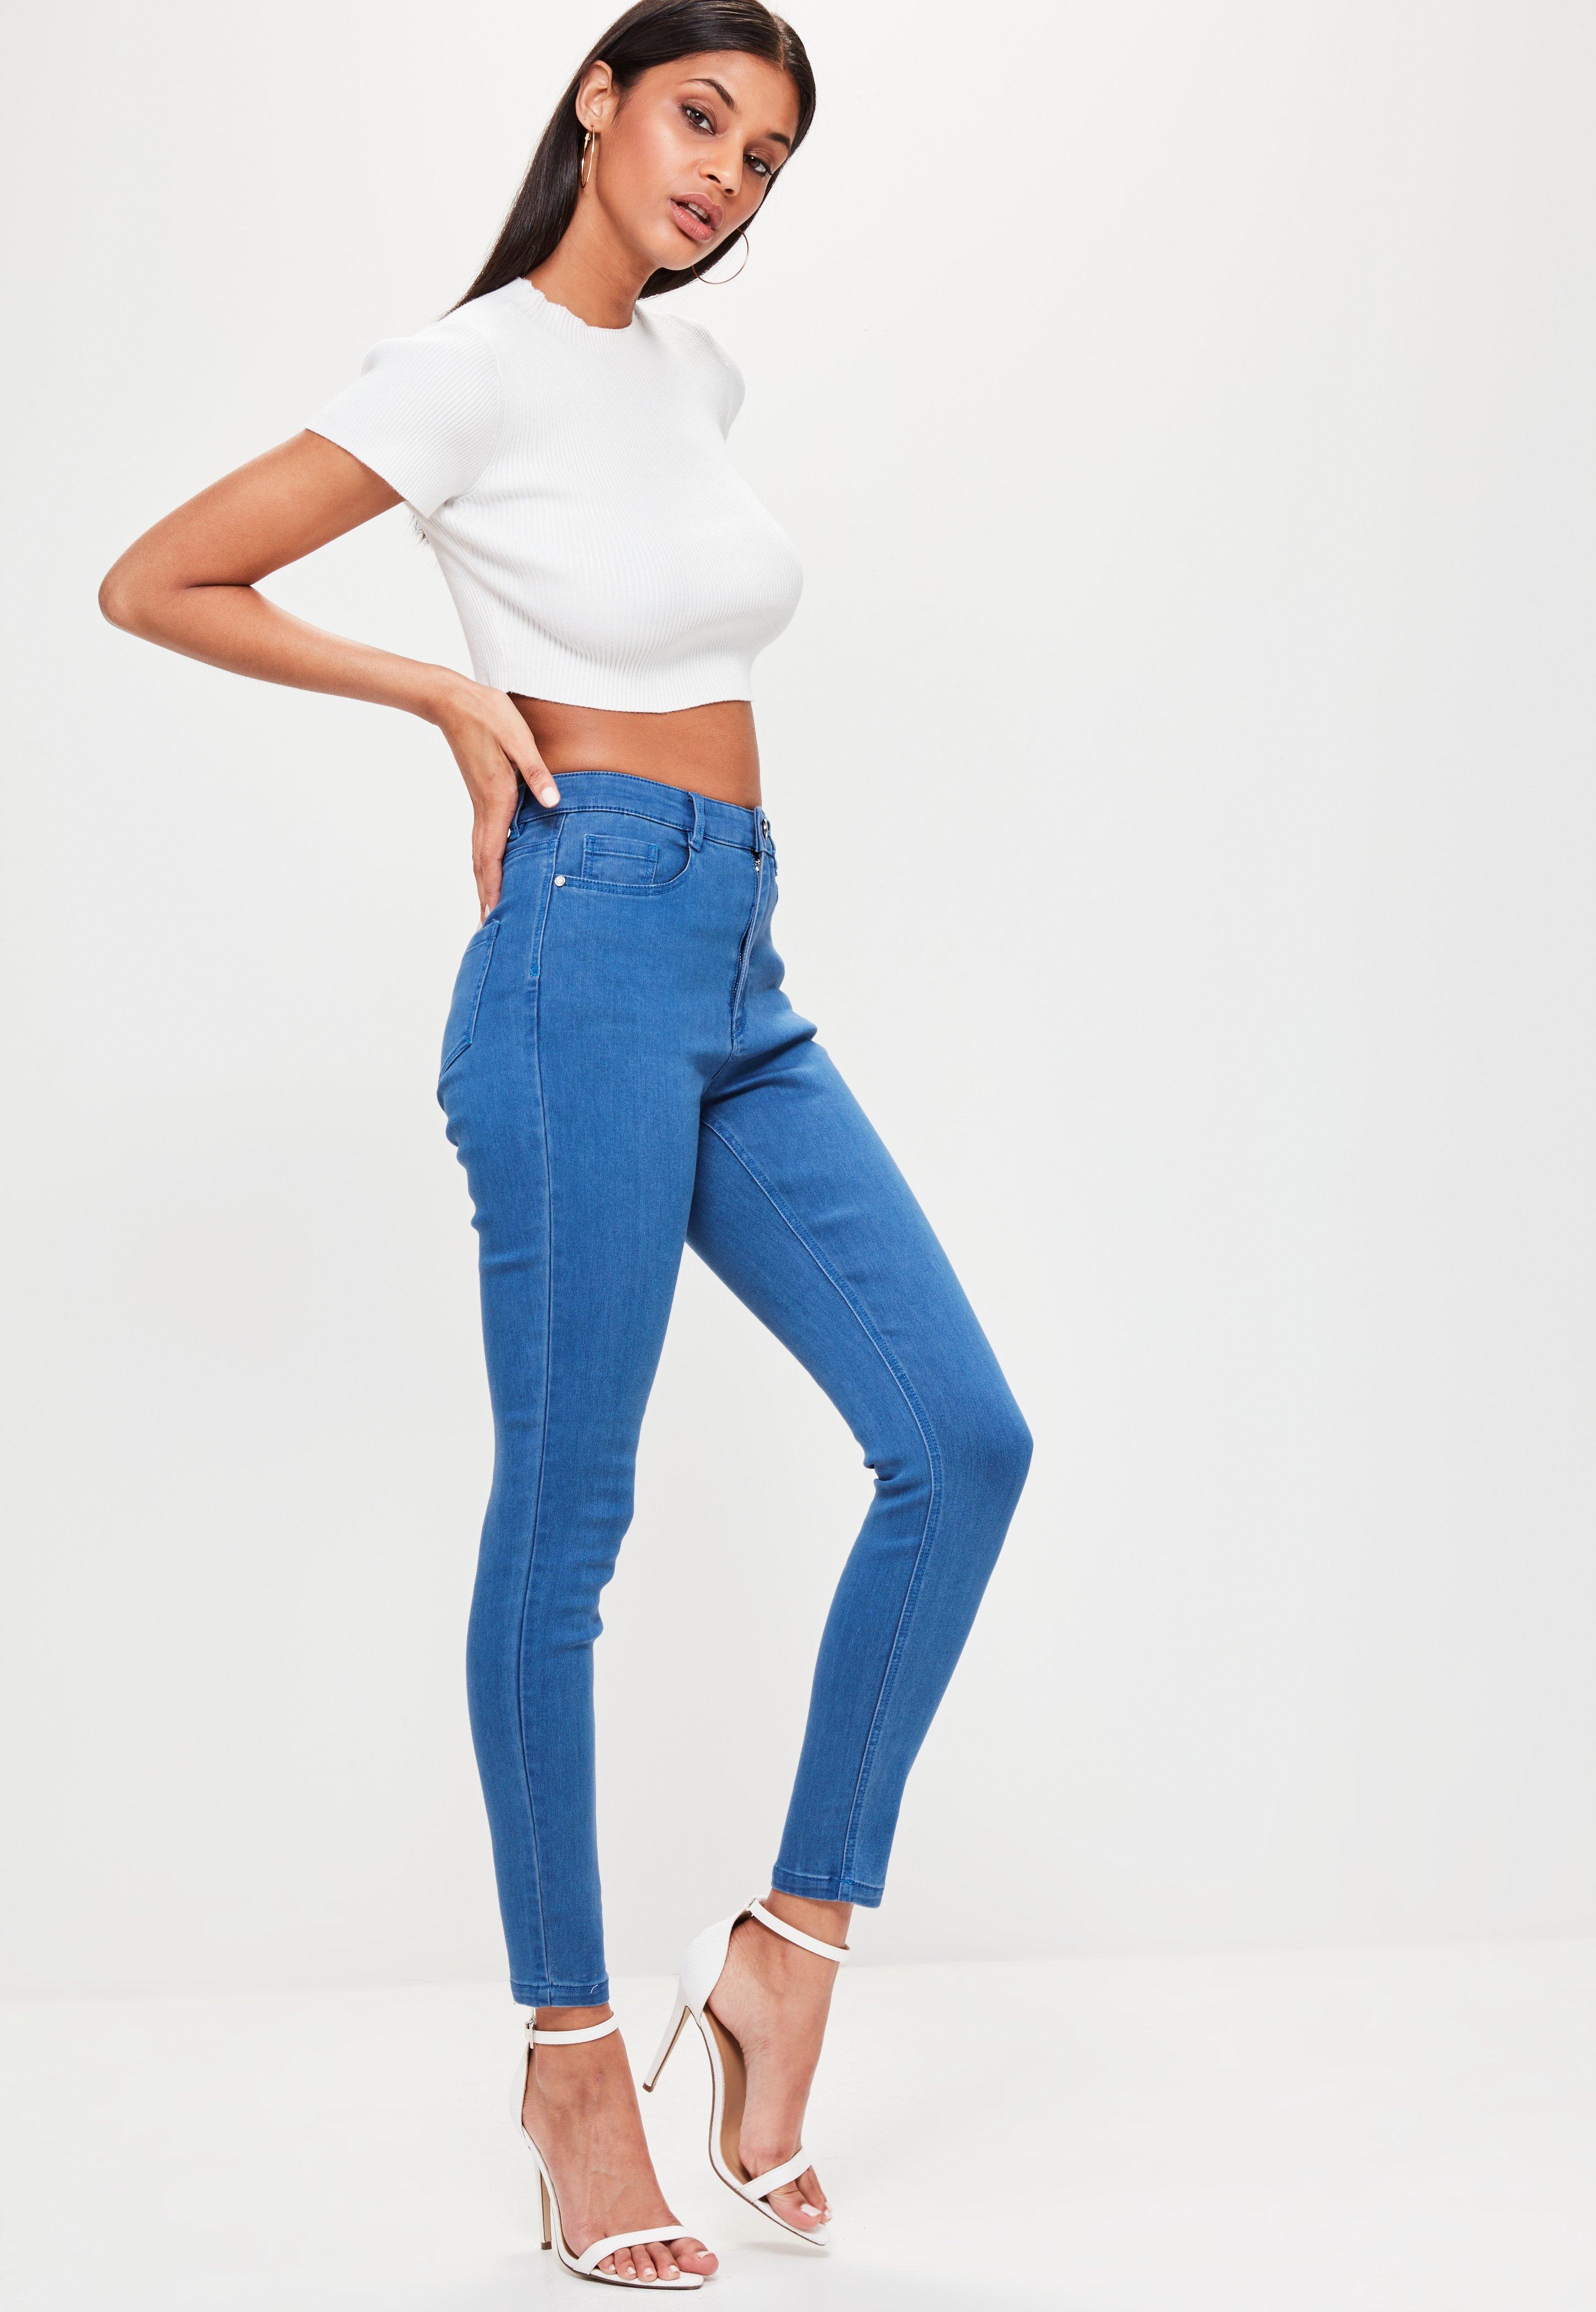 Lyst - Missguided Blue Hustler Mid Rise Stretch Skinny Jeans in Blue